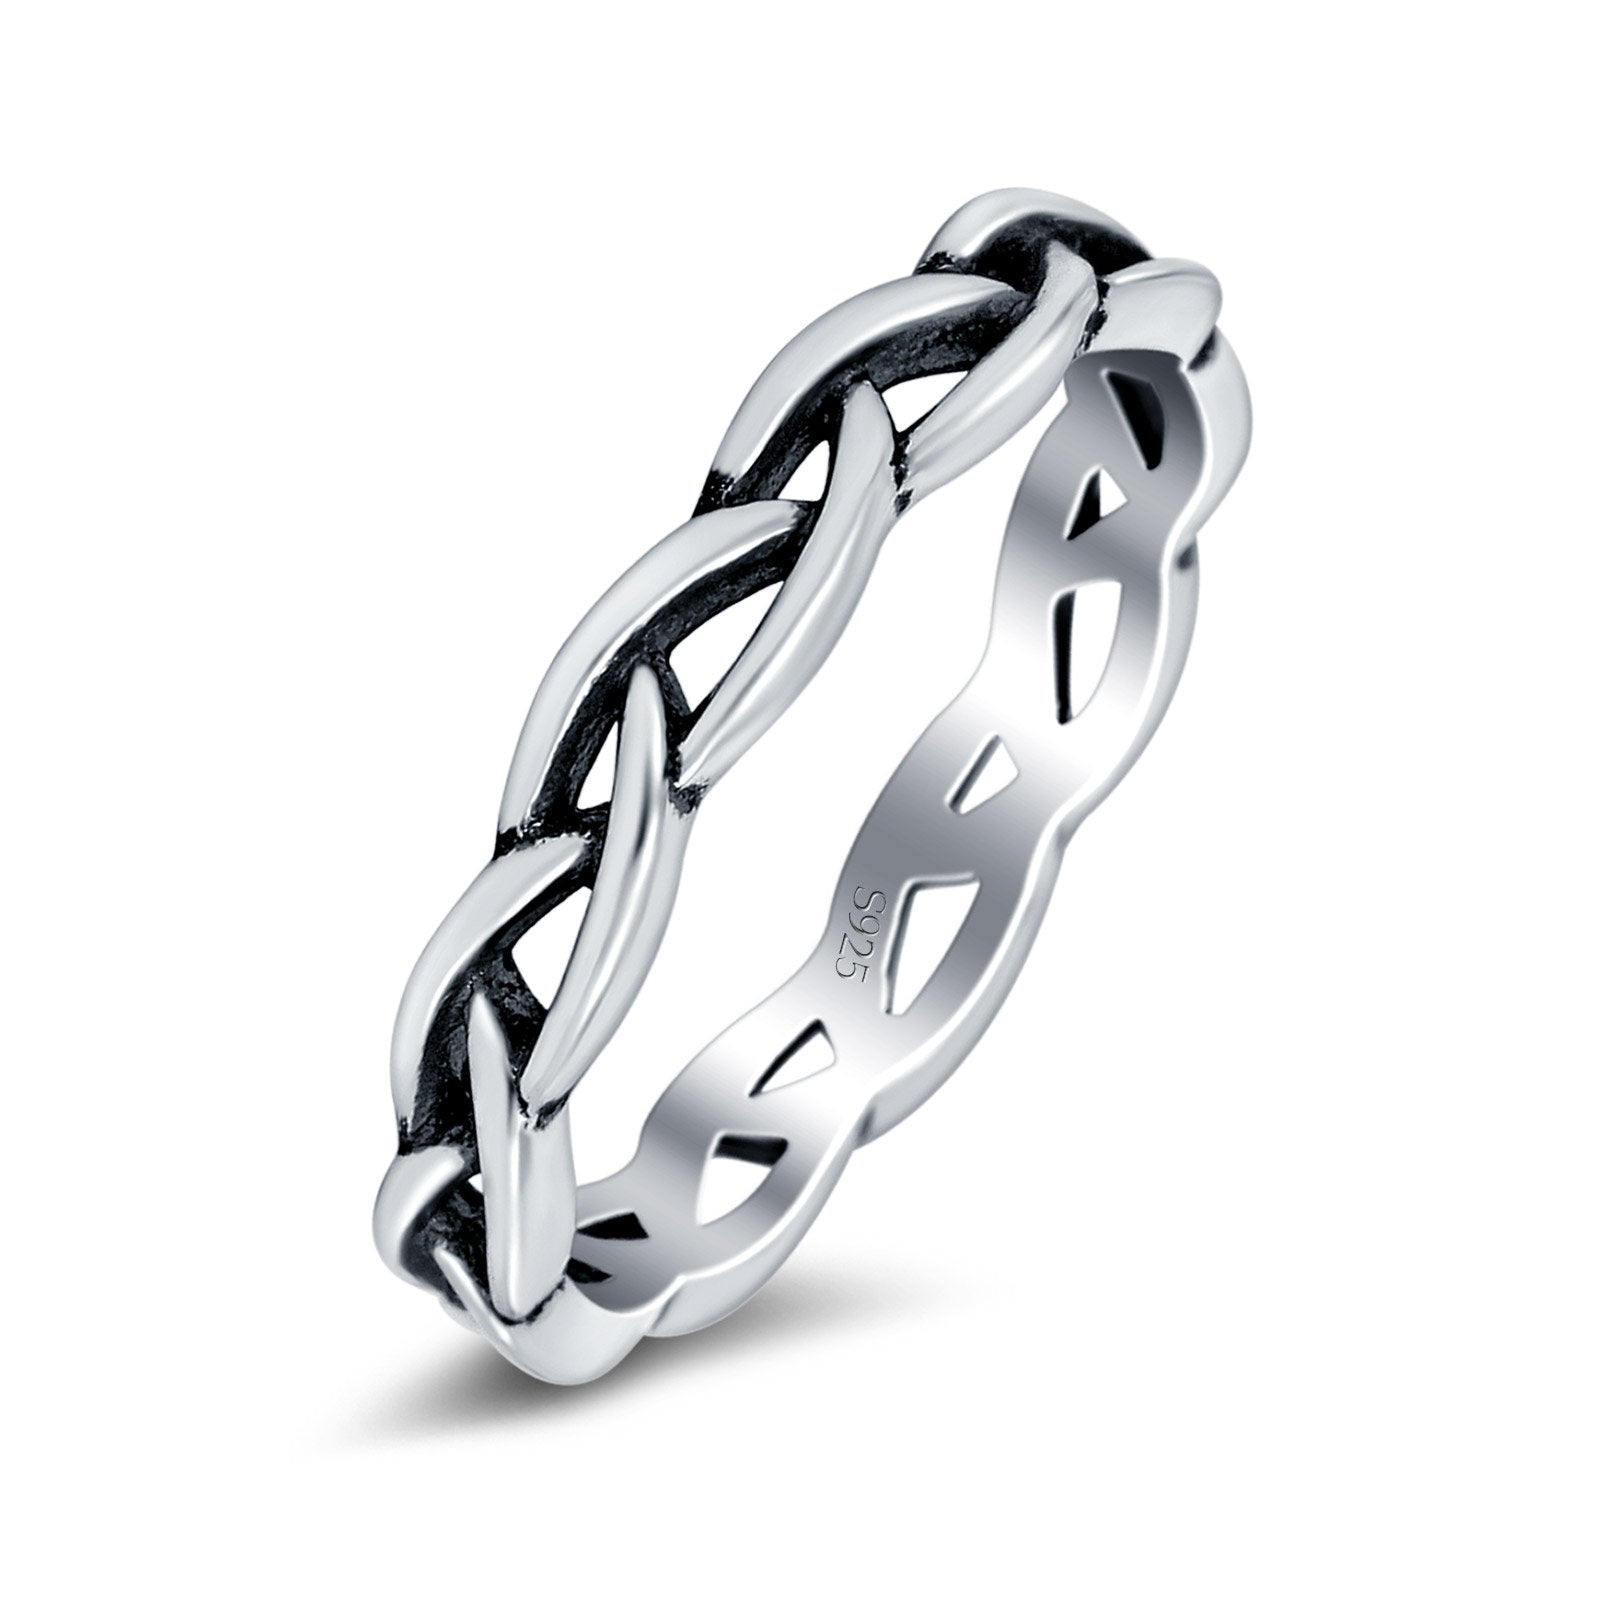 Infinity Band Oxidized Ring Solid Round 925 Sterling Silver